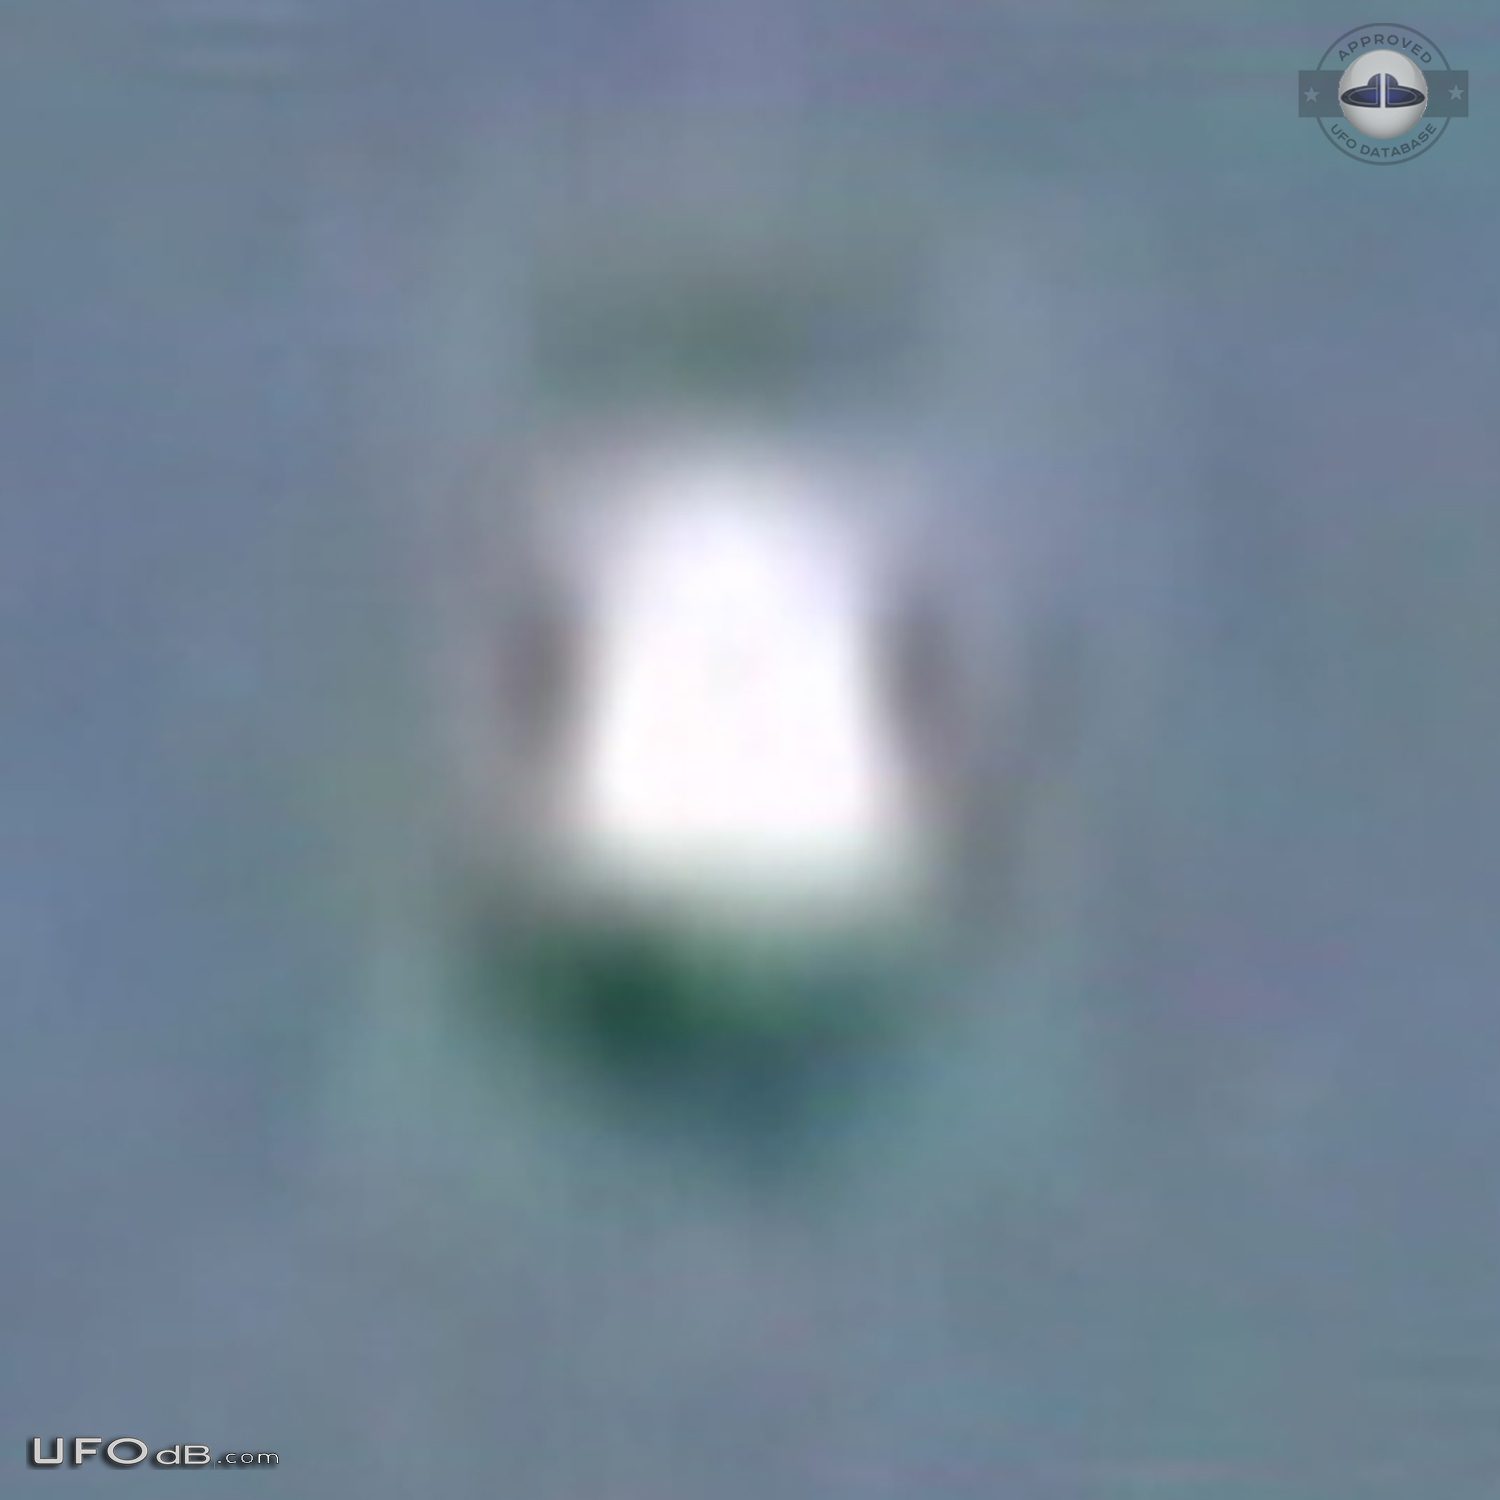 UFO came to about 2000 in elevation from the 30 000 feet - Canada 2011 UFO Picture #698-4